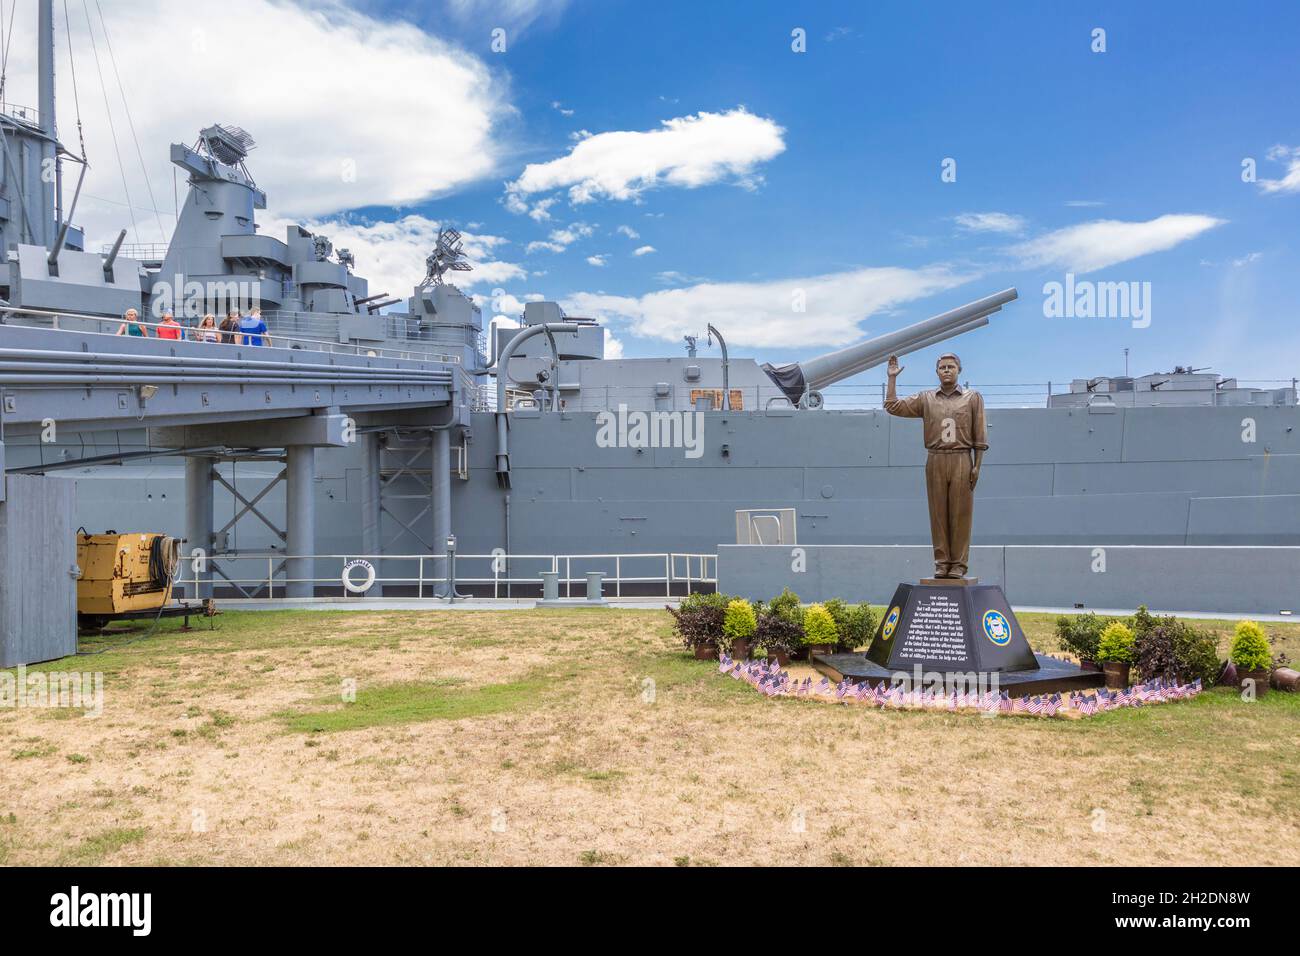 The Oath statue tribute to the US Coast Guard at the Battleship Memorial Park in Mobile, Alabama Stock Photo